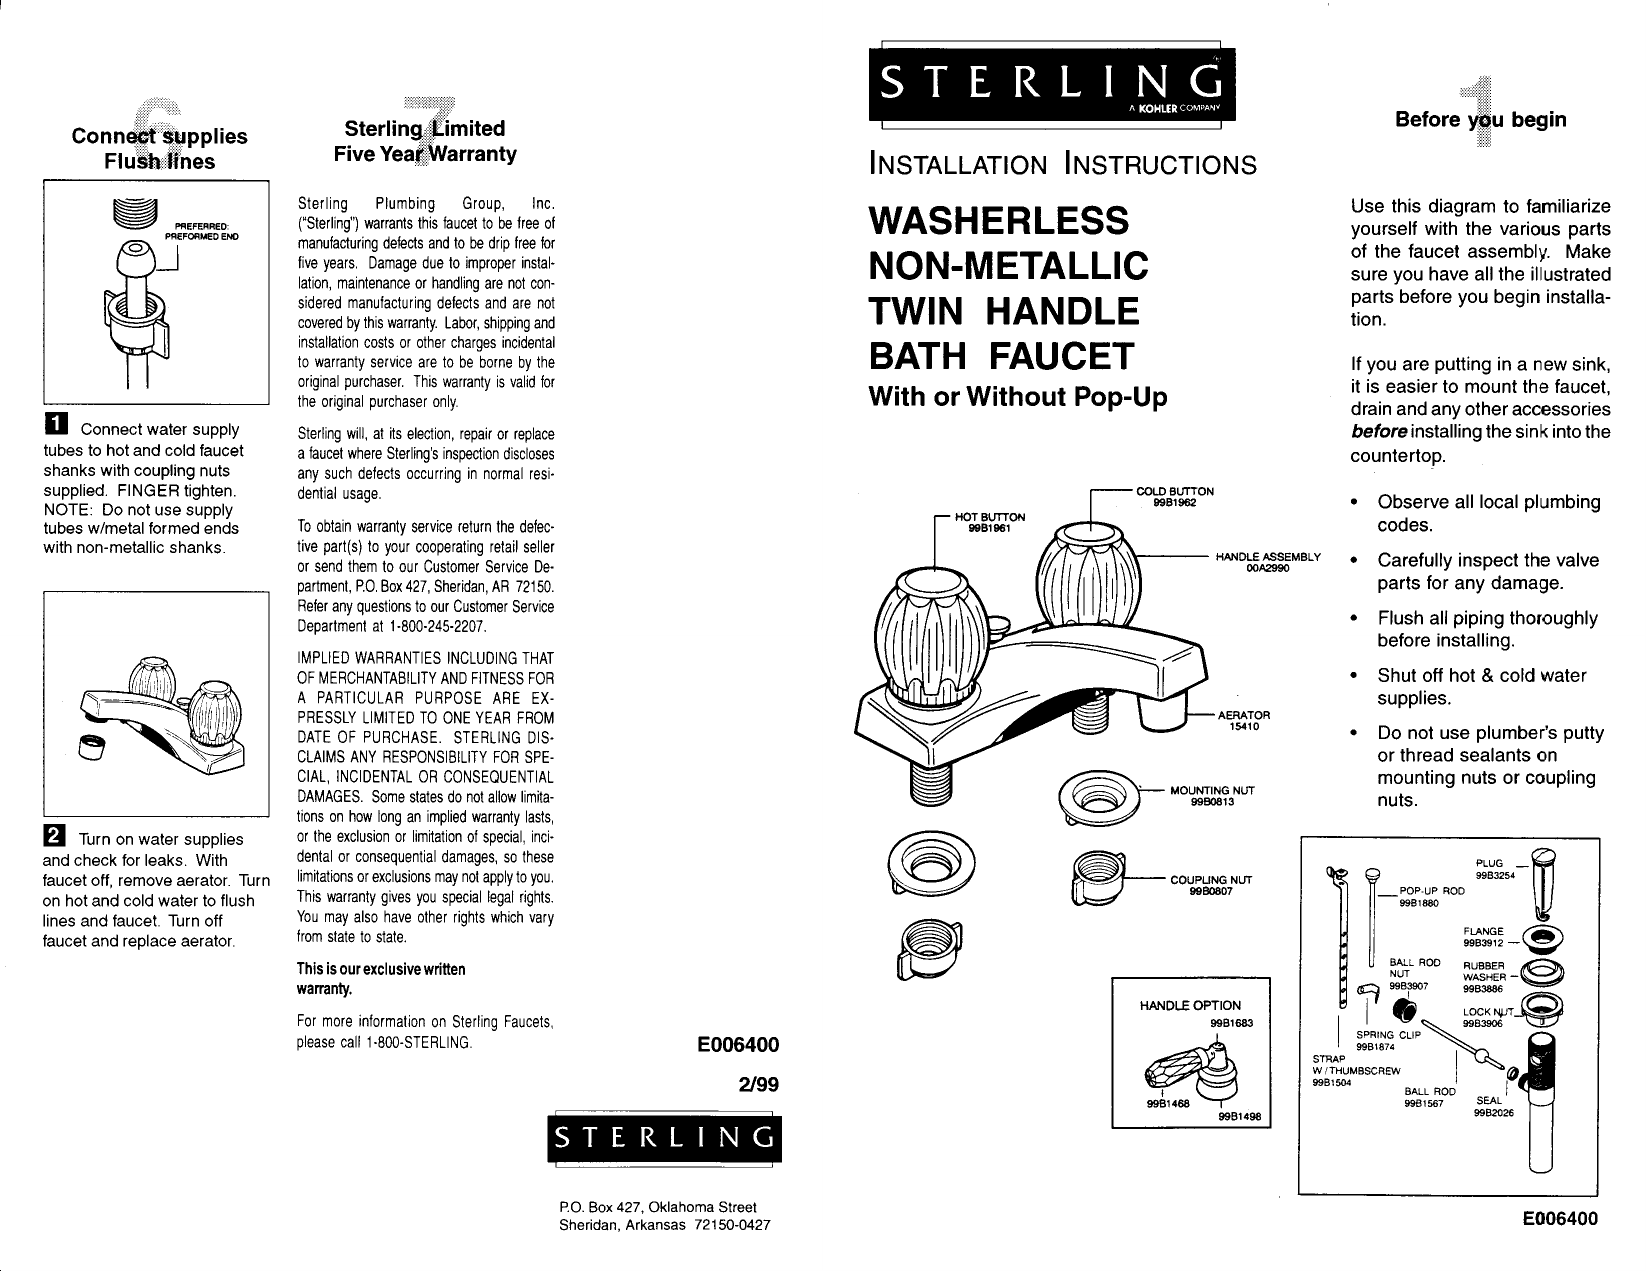 Page 1 of 2 - Sterling E006400 INSTALLATION INSTRUCTIONS-FAUCET, FI06372/06382 SERIES 063 WASHERLESS NON-METALLIC TEIN HANDLE BATH User Manual  To The 50d78ada-56e8-425b-ad23-dfa7d94c1150